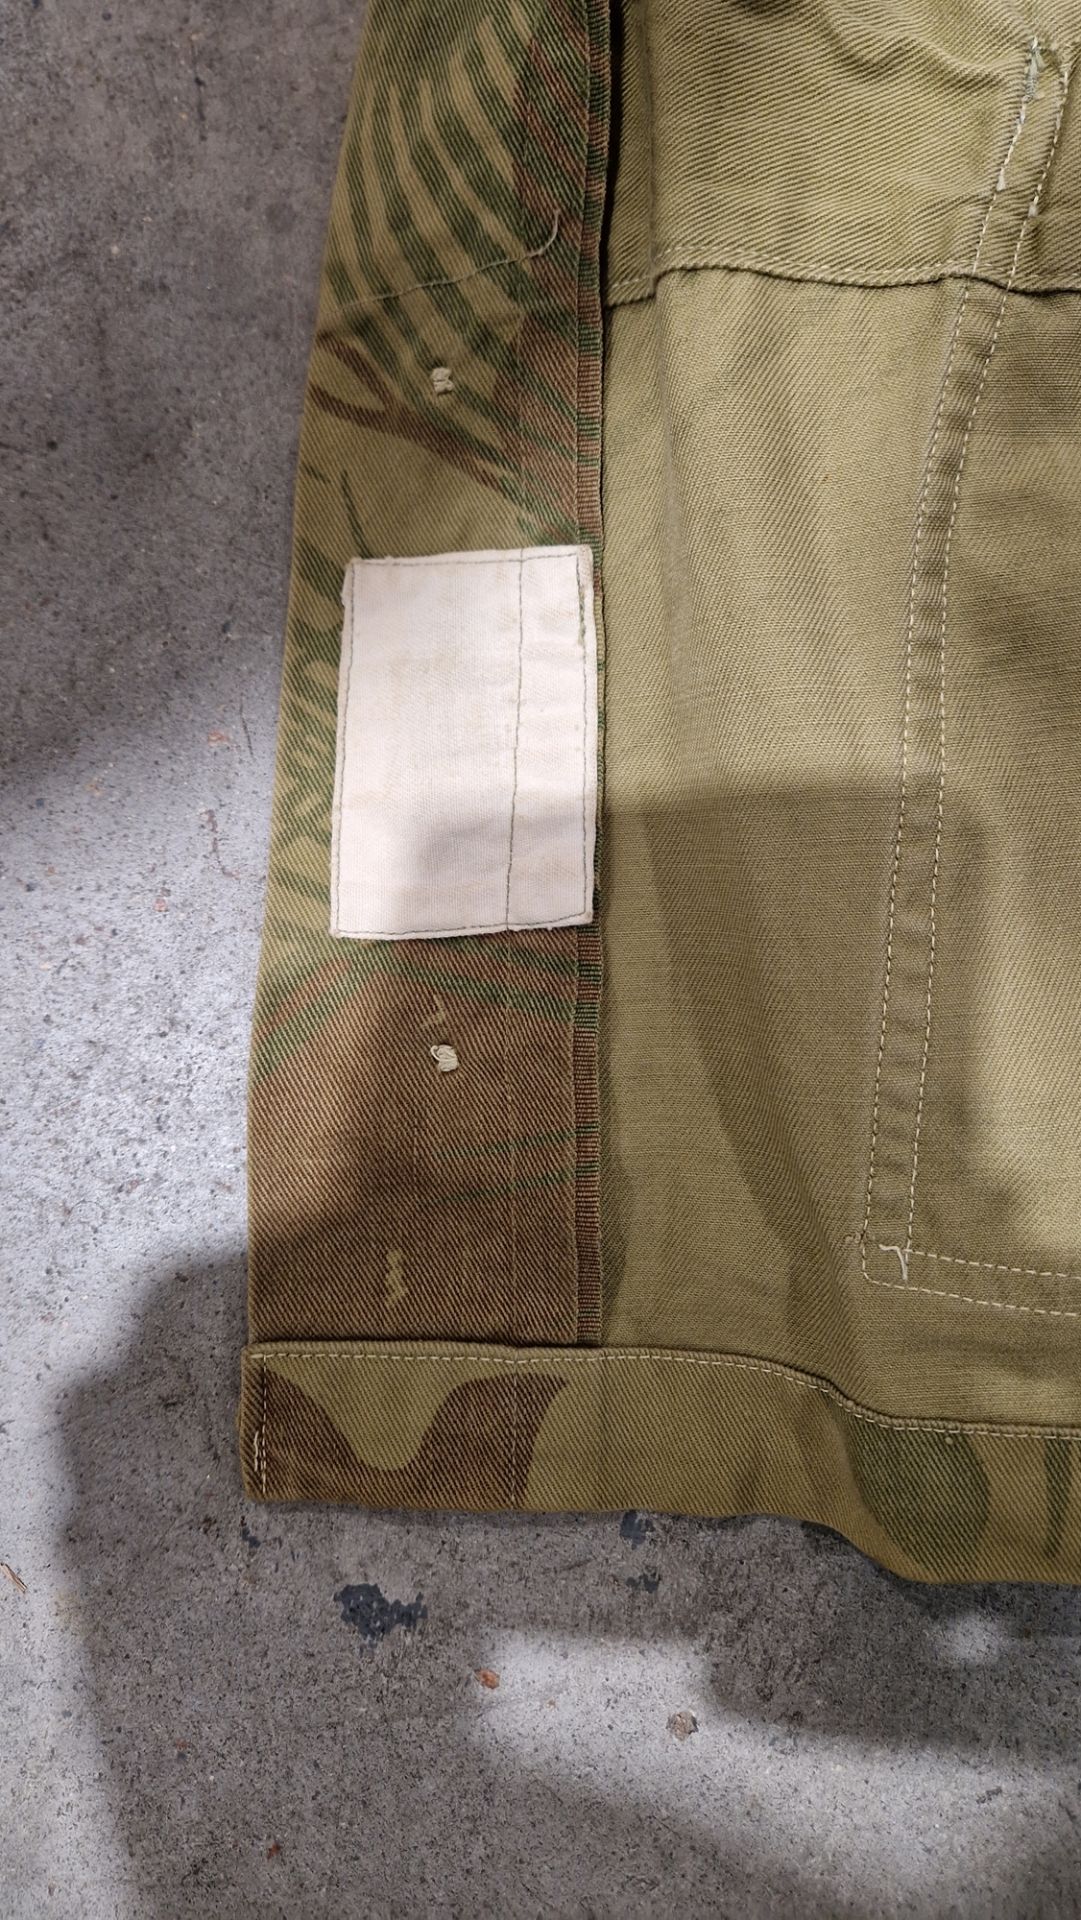 1950's Rhodesian combat jacket and a 1970's camouflage jacket (2)  Condition Report Photos uploaded - Image 5 of 6